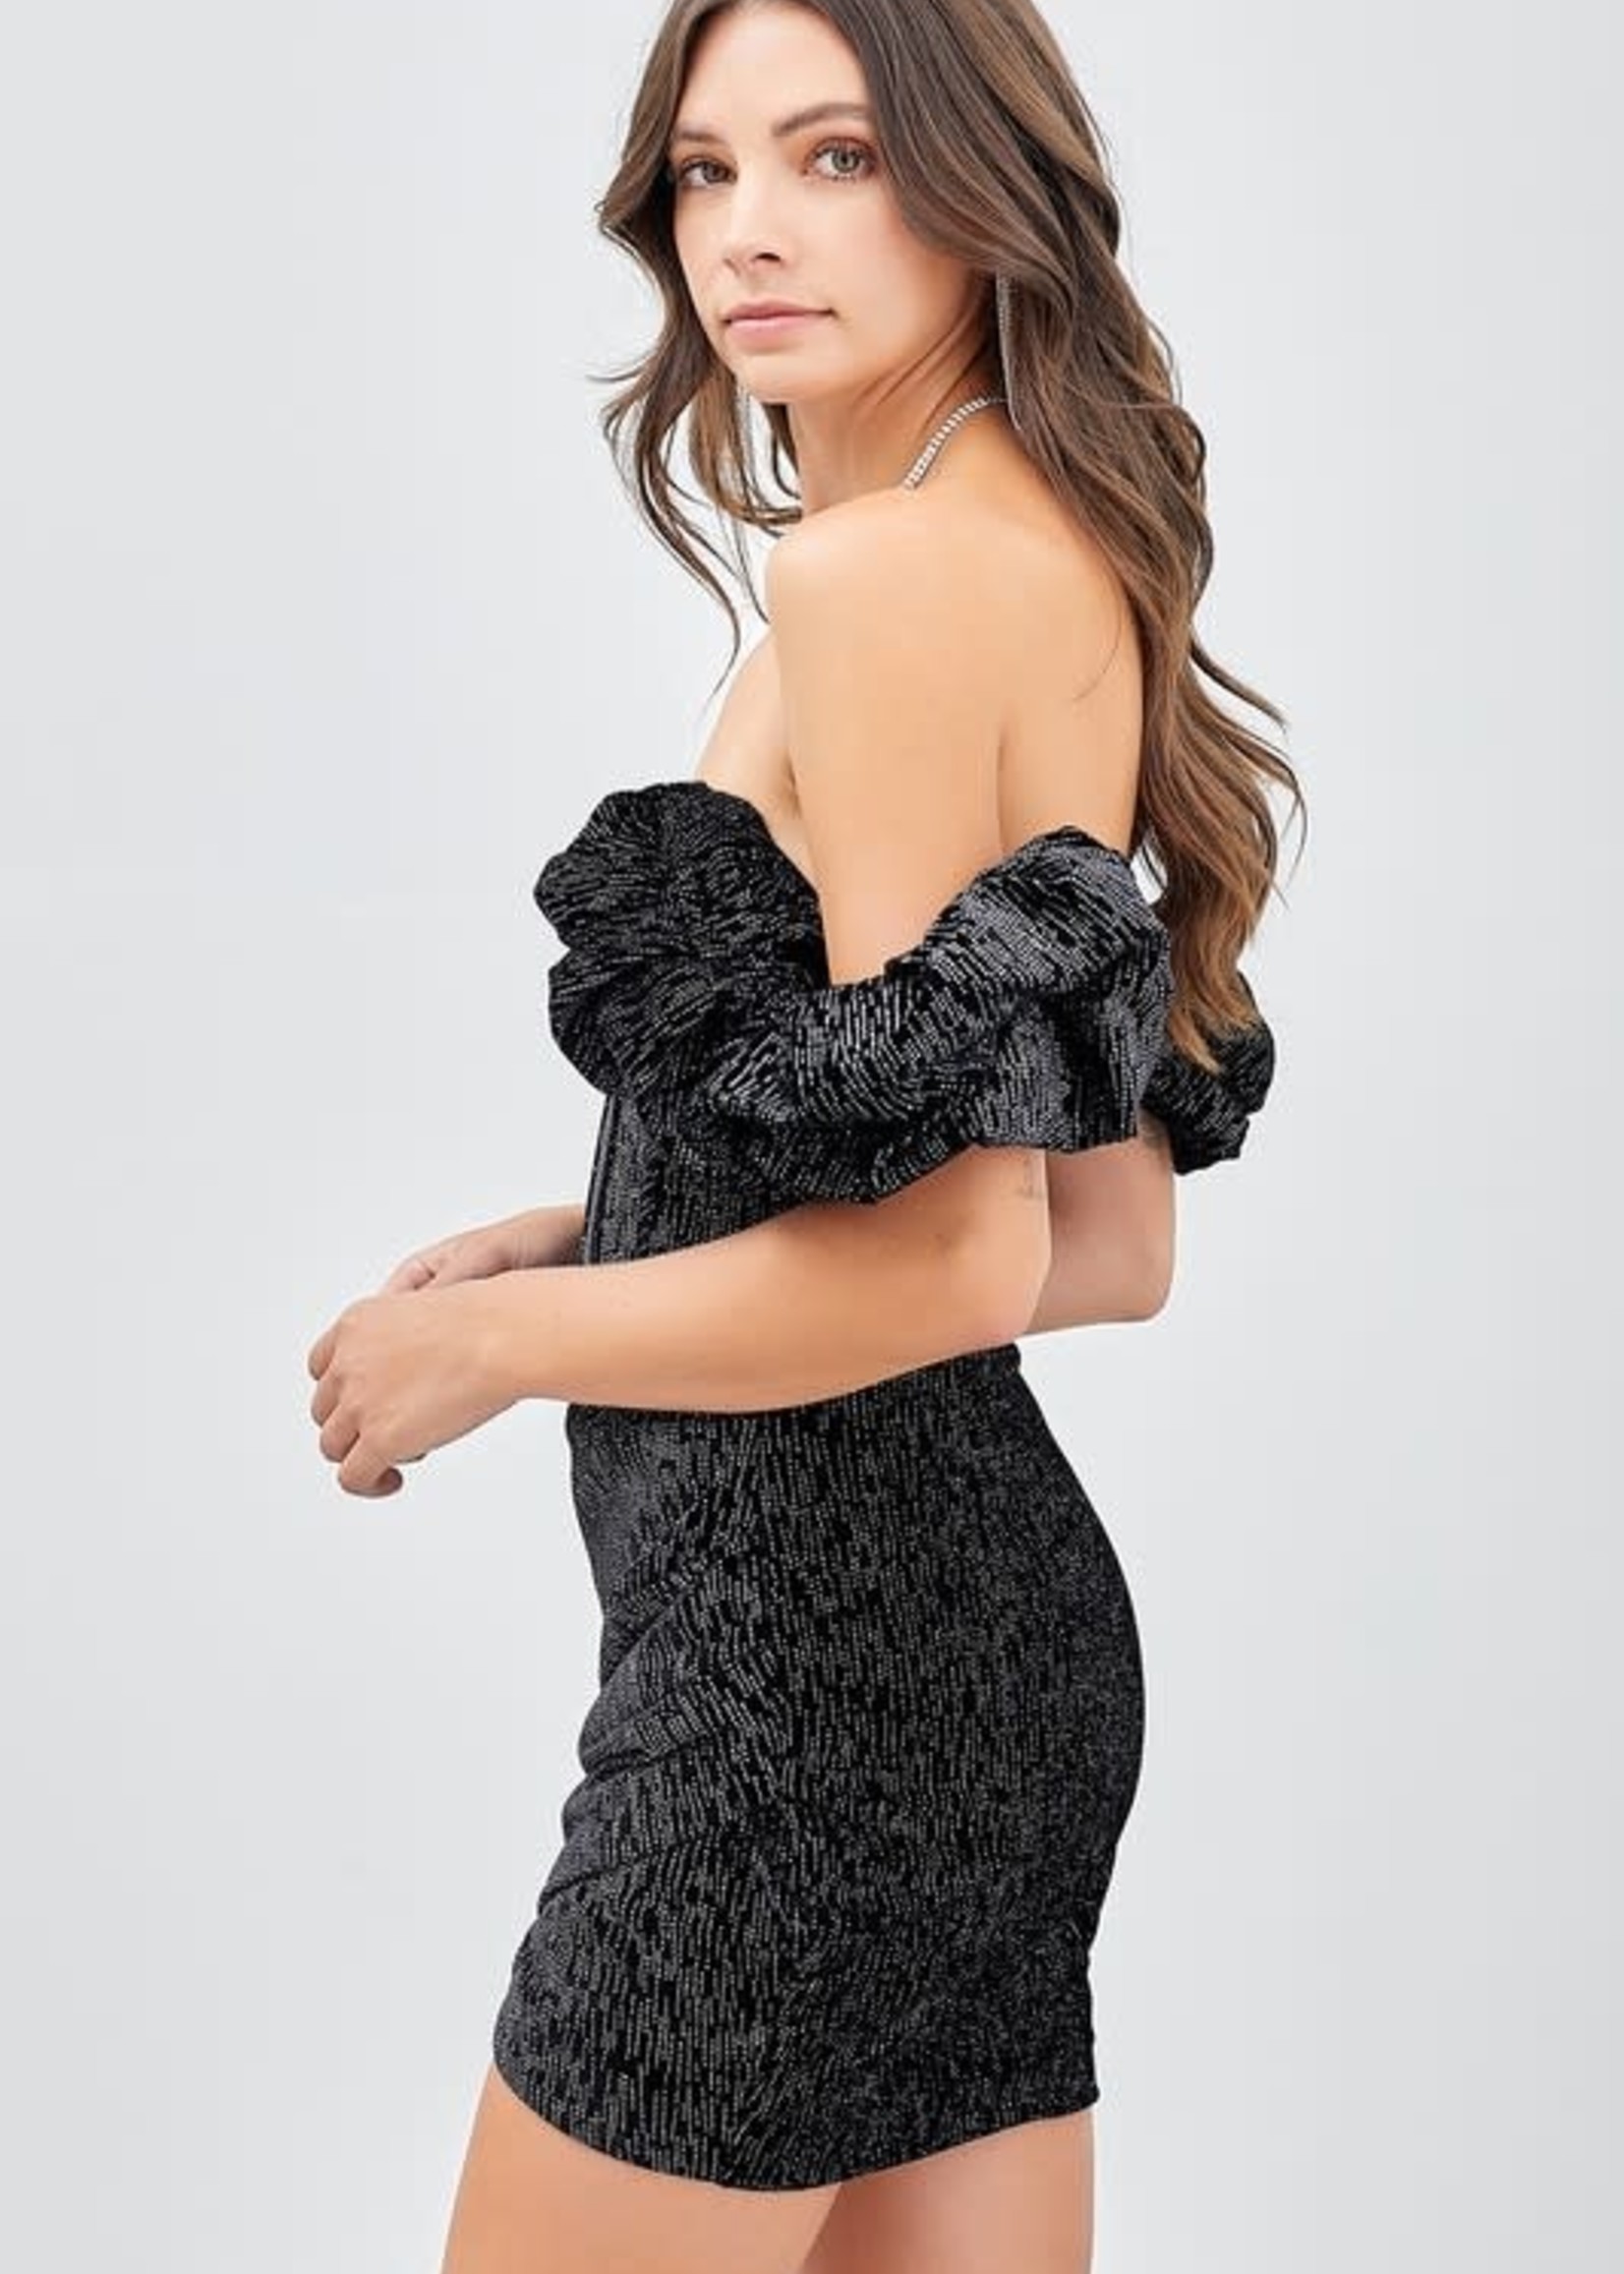 Ruffle On Party Dress (2 Colors)